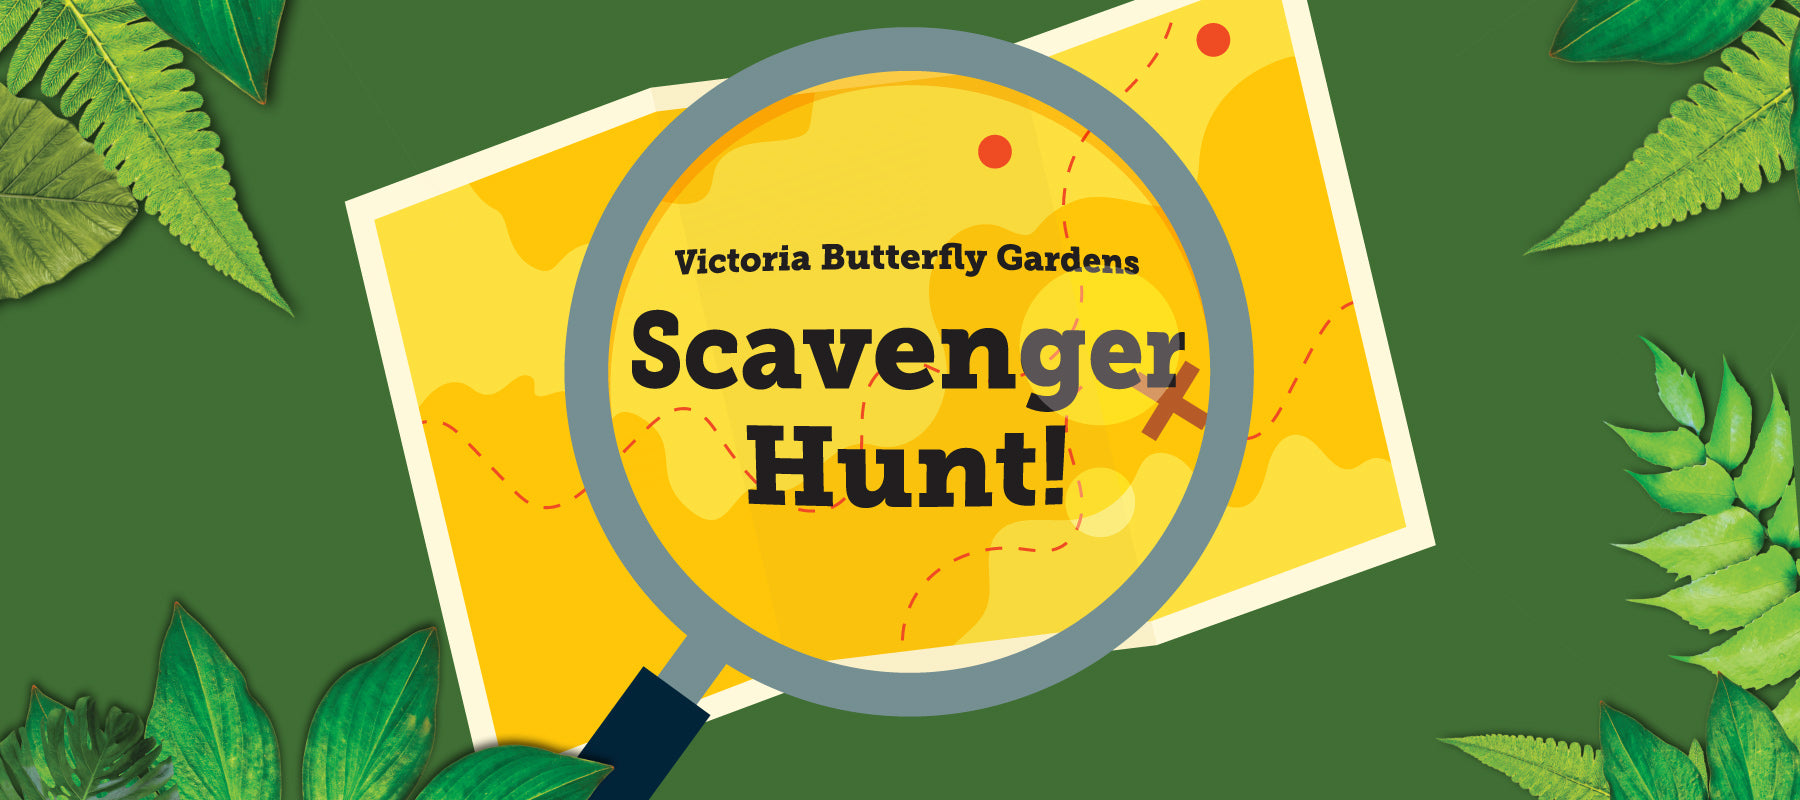 A large illustrated banner highlighting the Victoria Butterfly Gardens Scavenger Hunt. The image contains illustrated foliage and a magnifying glass hovering over a map.